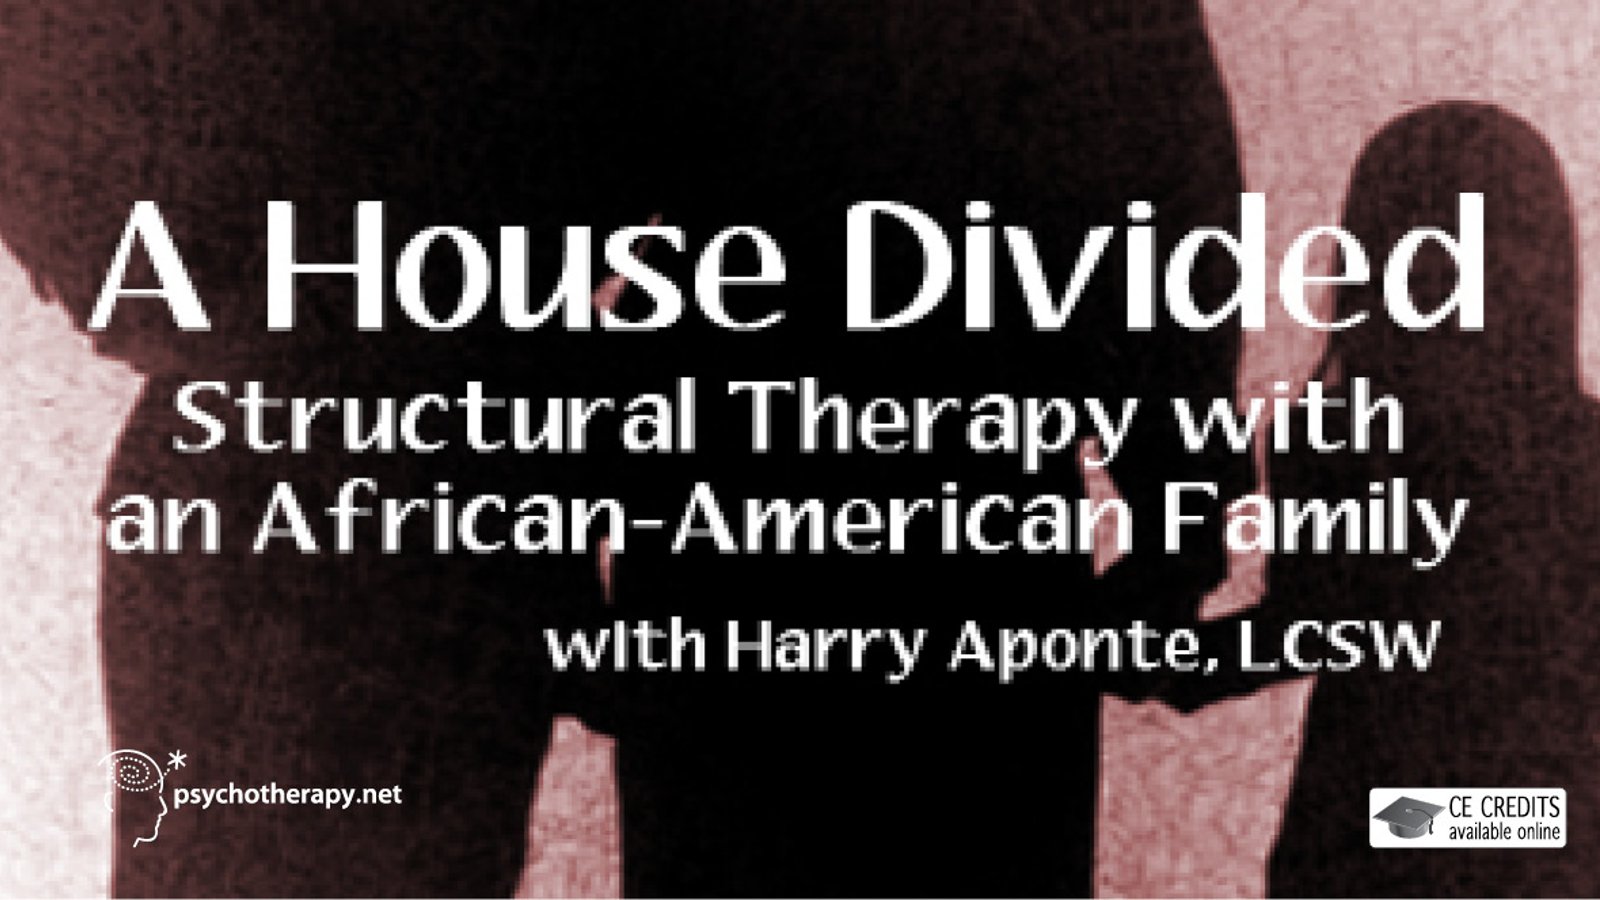 A House Divided - Structural Therapy with a Black Family with Harry Aponte